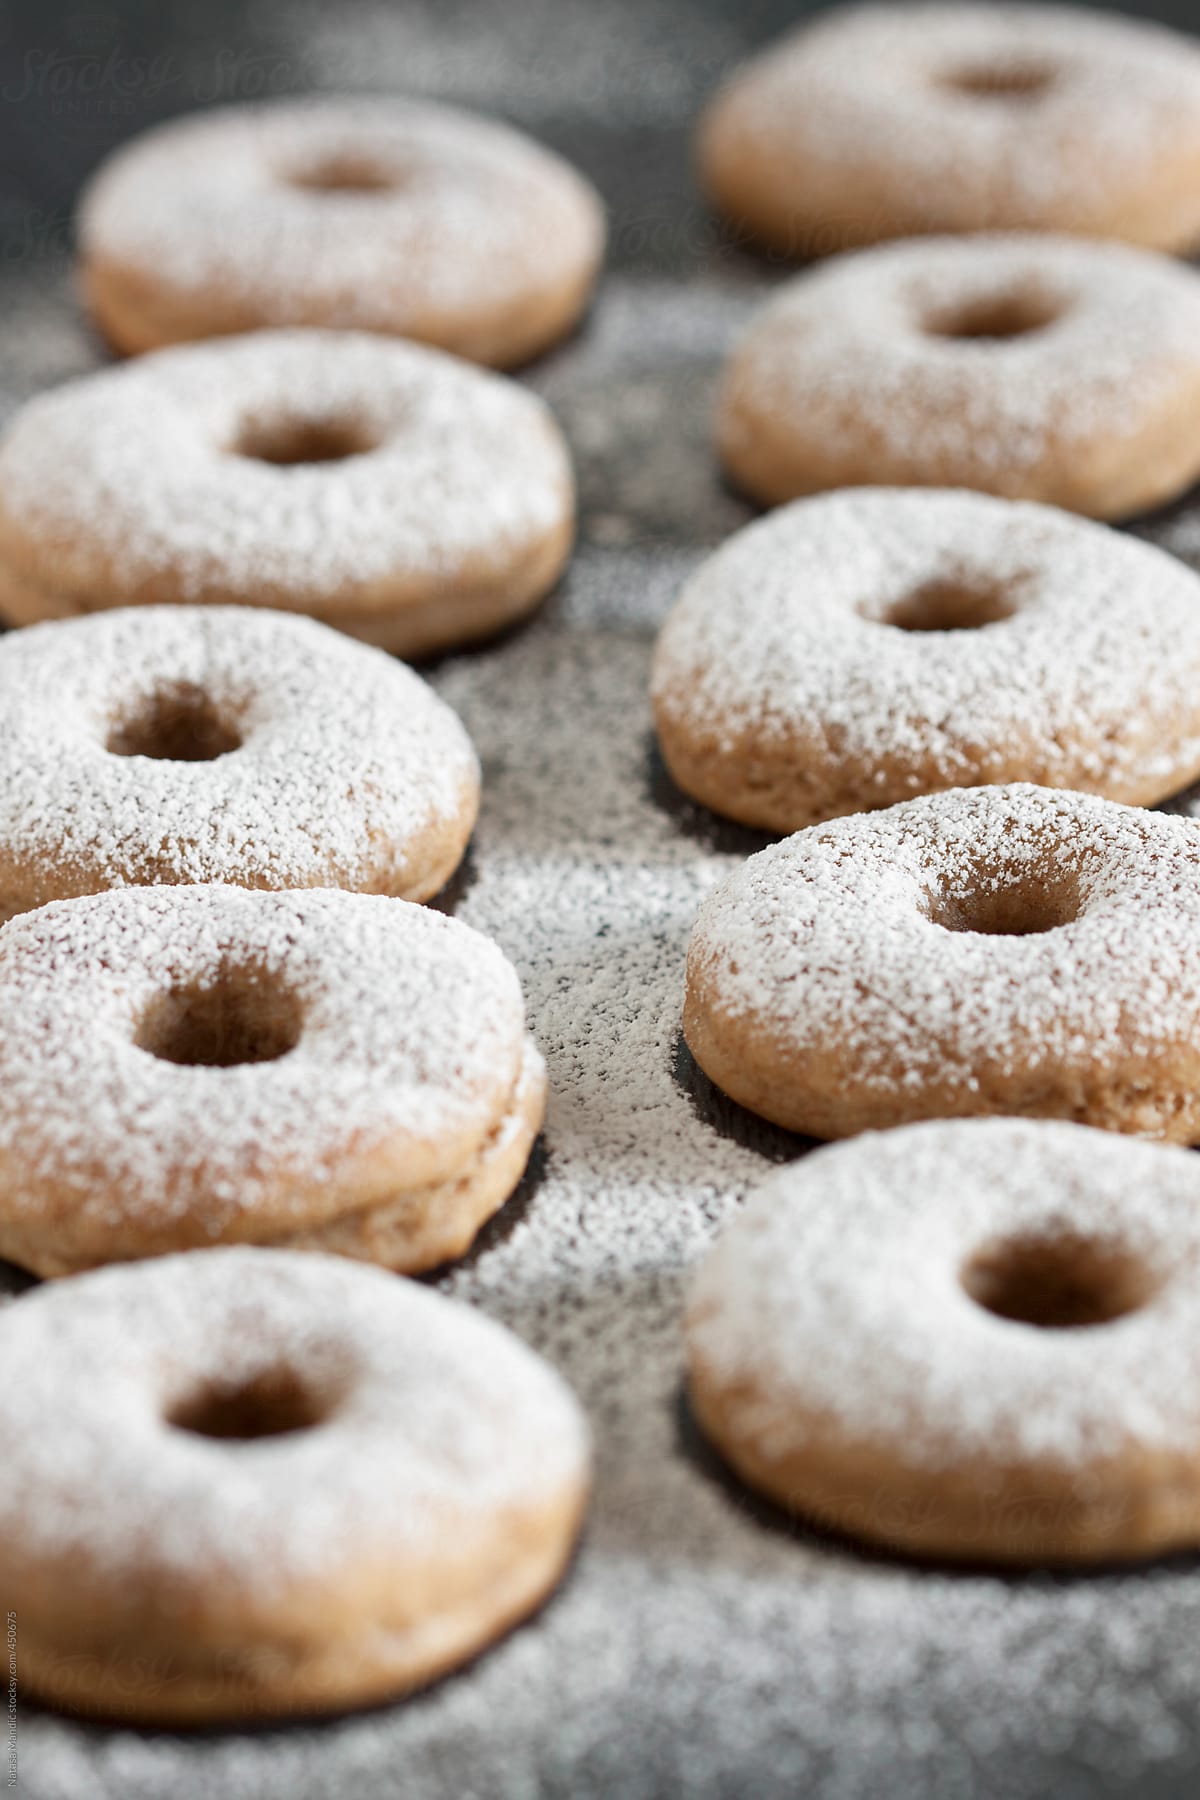 Homemade baked donuts with sugar